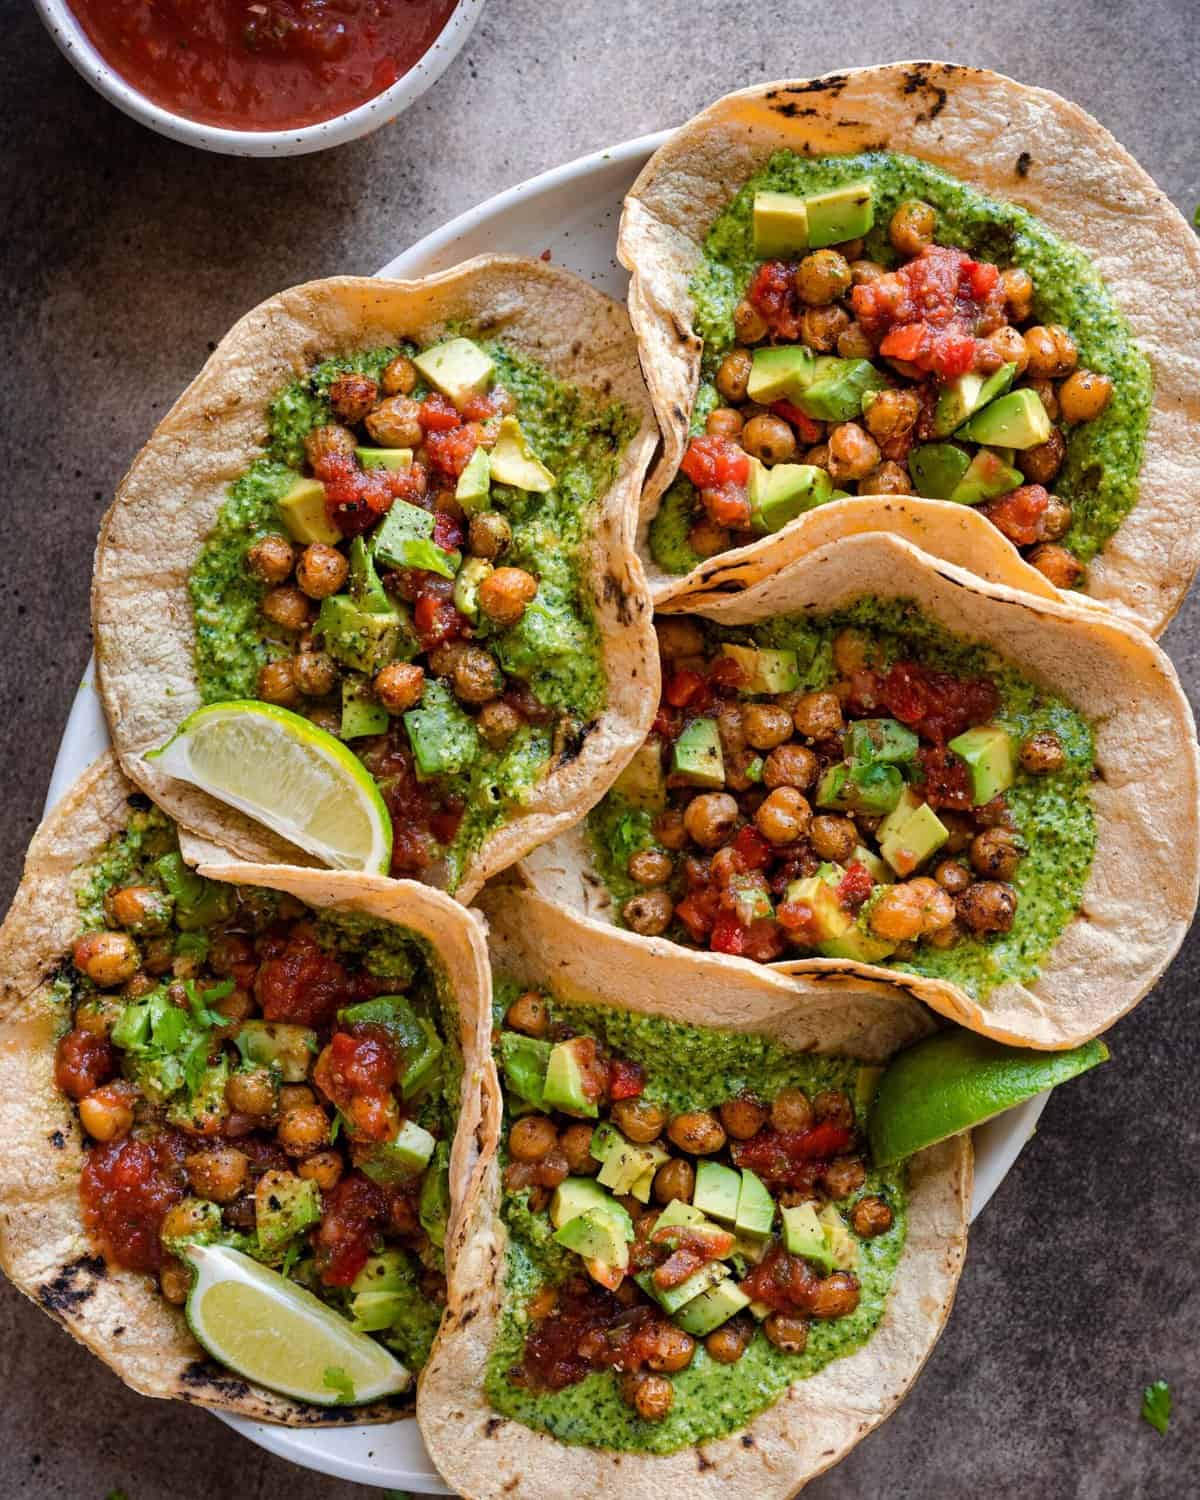 vegan chickpea tacos with cilantro pesto served with salsa and avocado, five tacos arranged on a platter on a brown backdrop